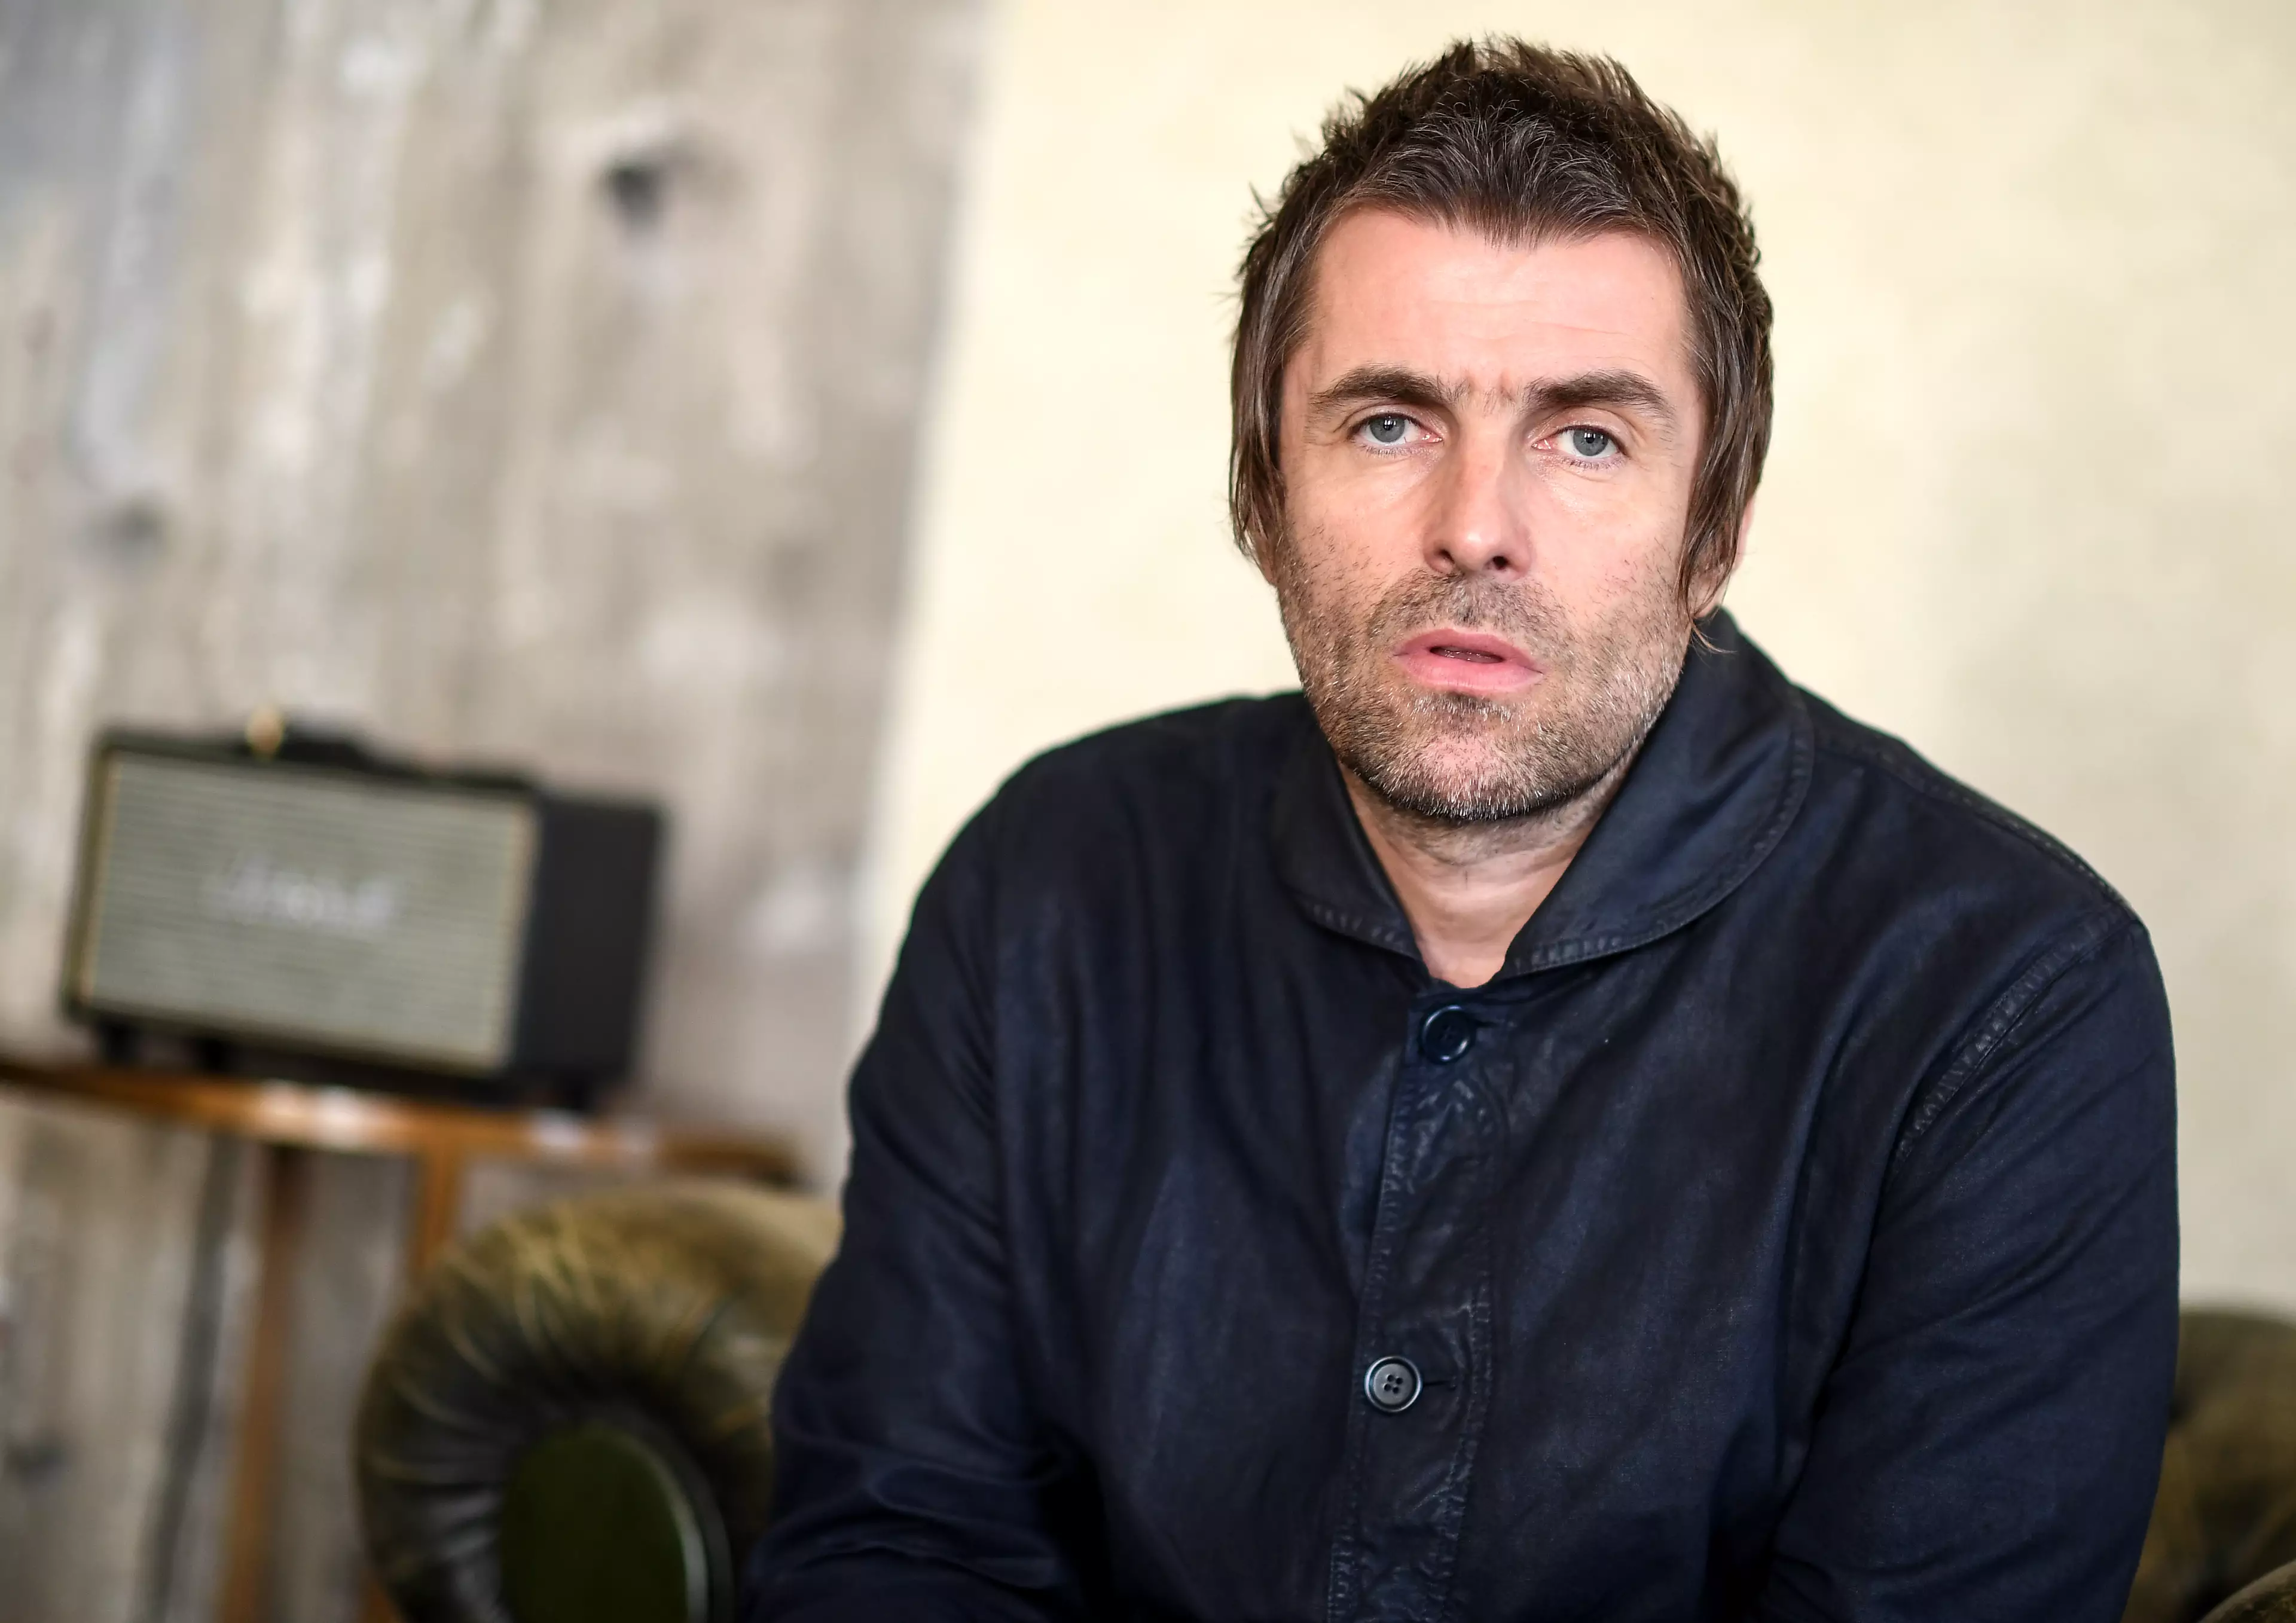 Liam Gallagher has teamed up with Adidas.